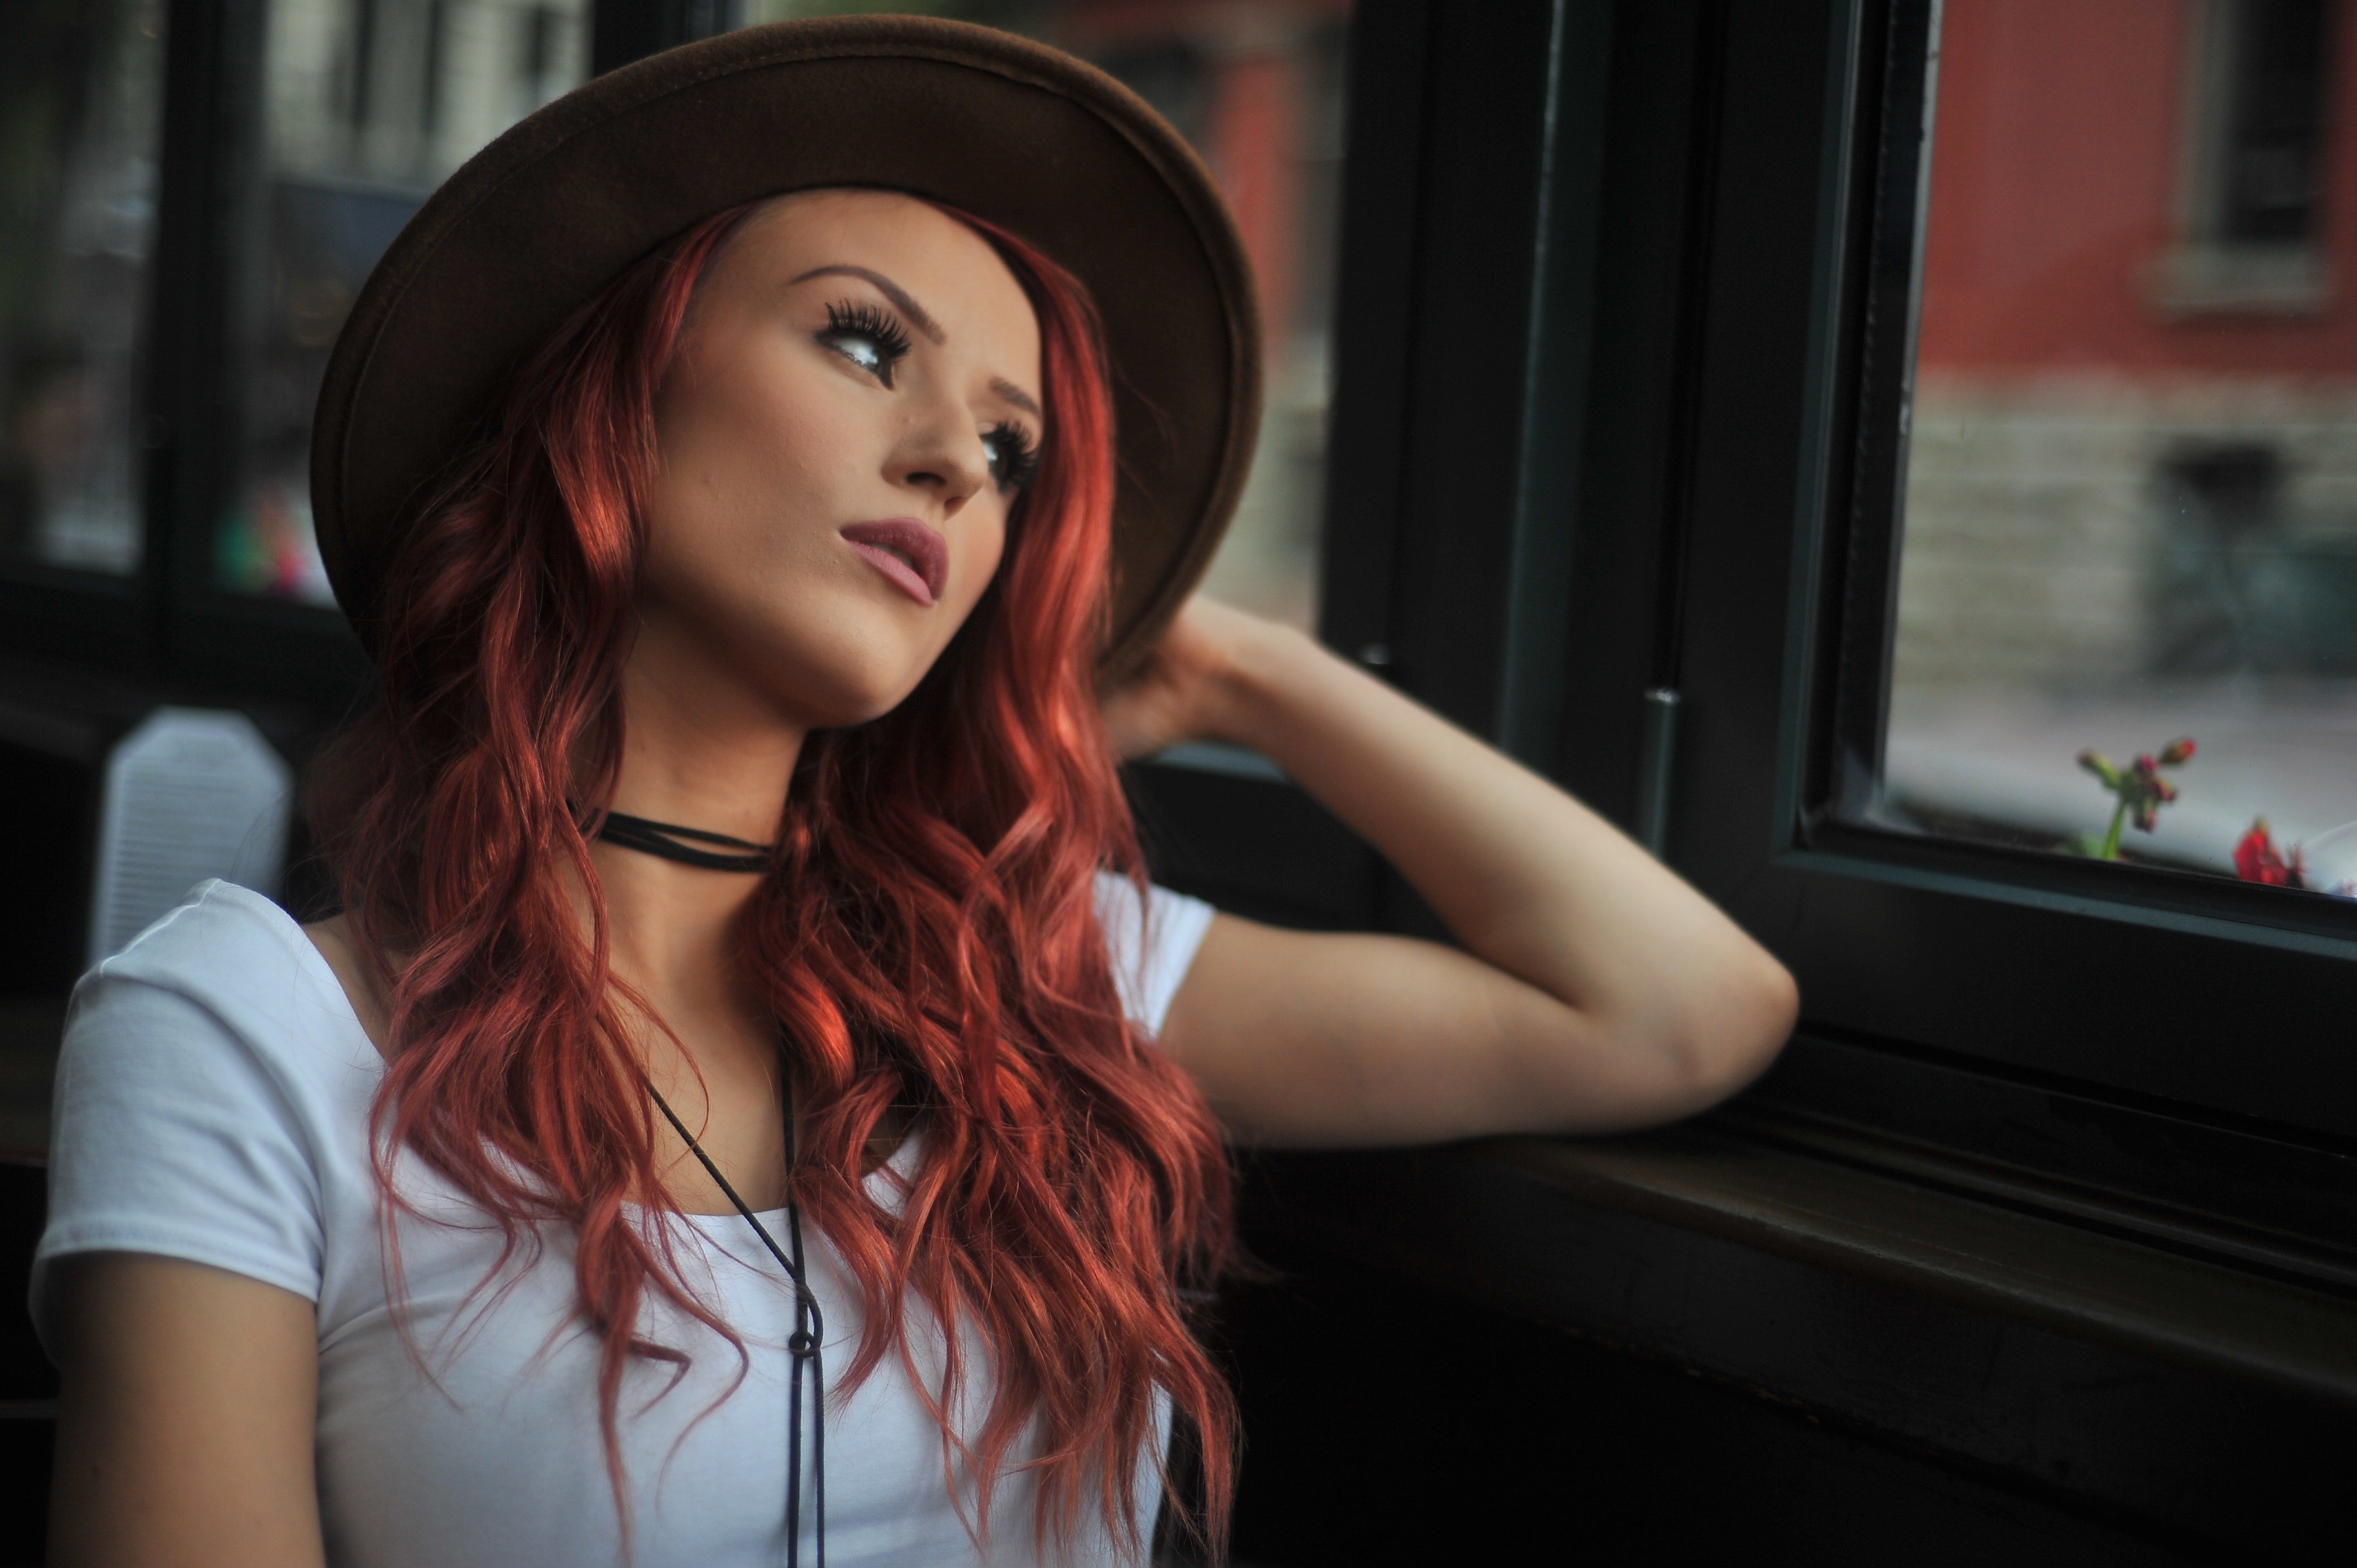 Redhead gazing wistfully out of the window. | Source: Pexels